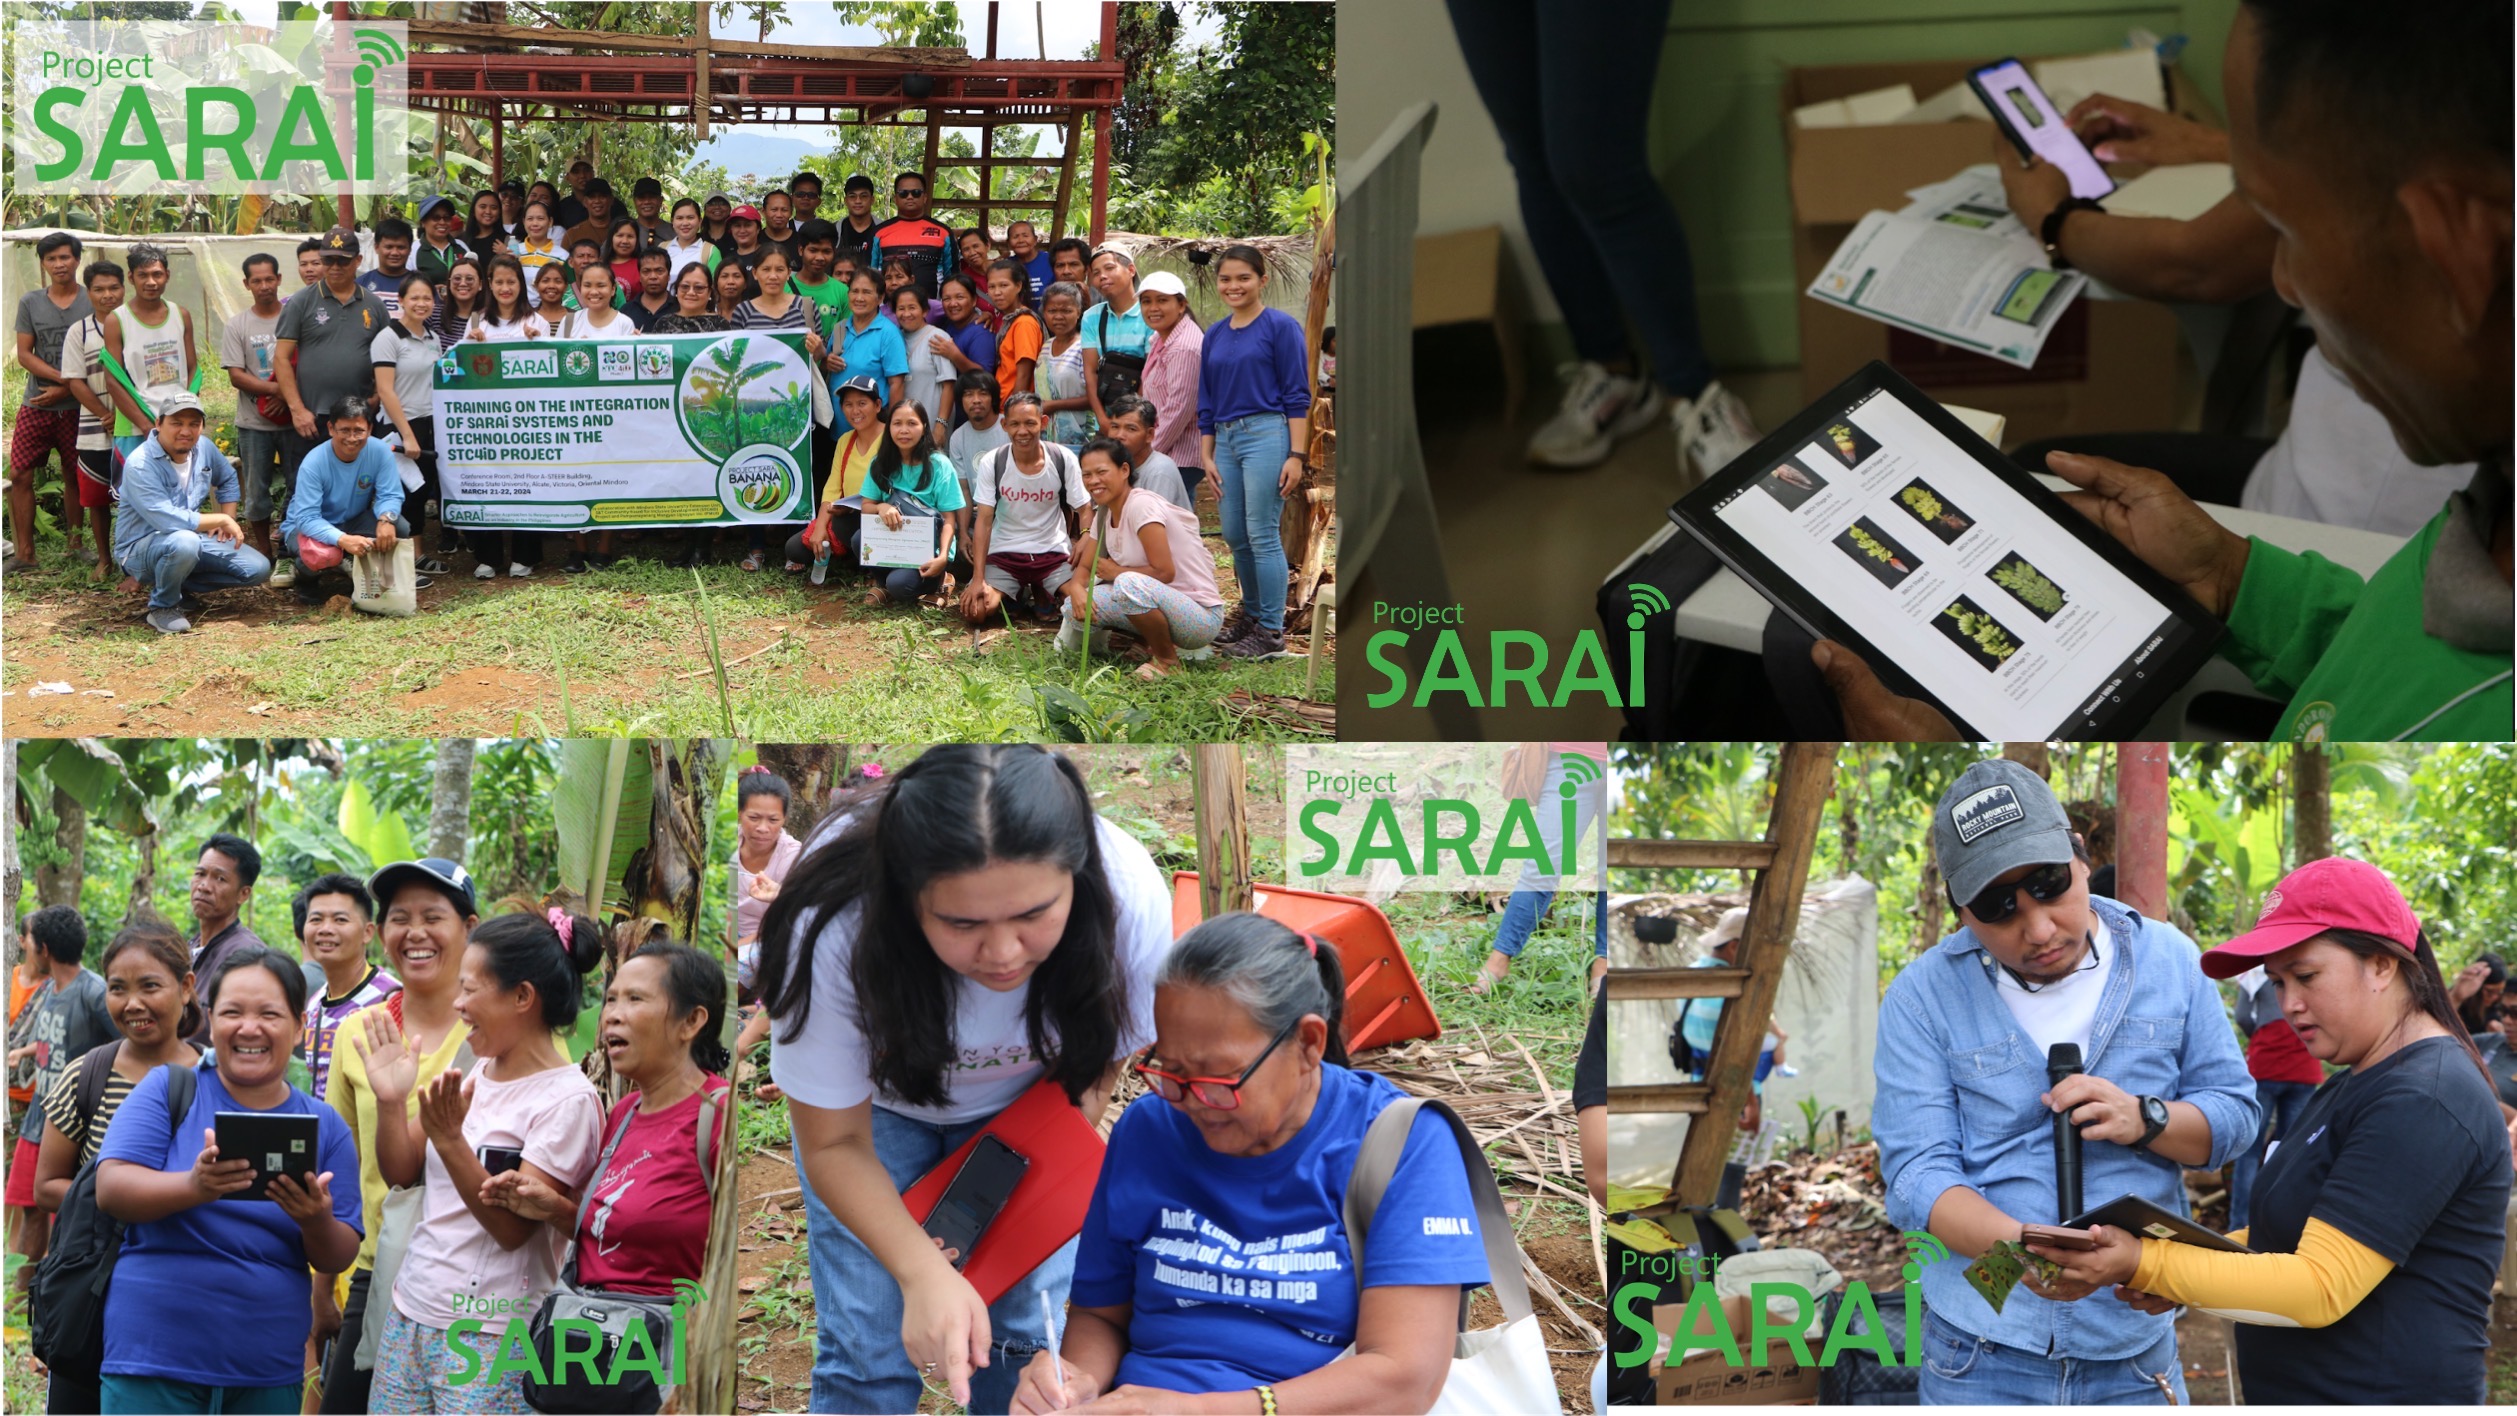 Empowering Indigenous Agriculture with Smarter Technologies: Project SARAi and Project STC4iD Training Initiatives in Oriental Mindoro